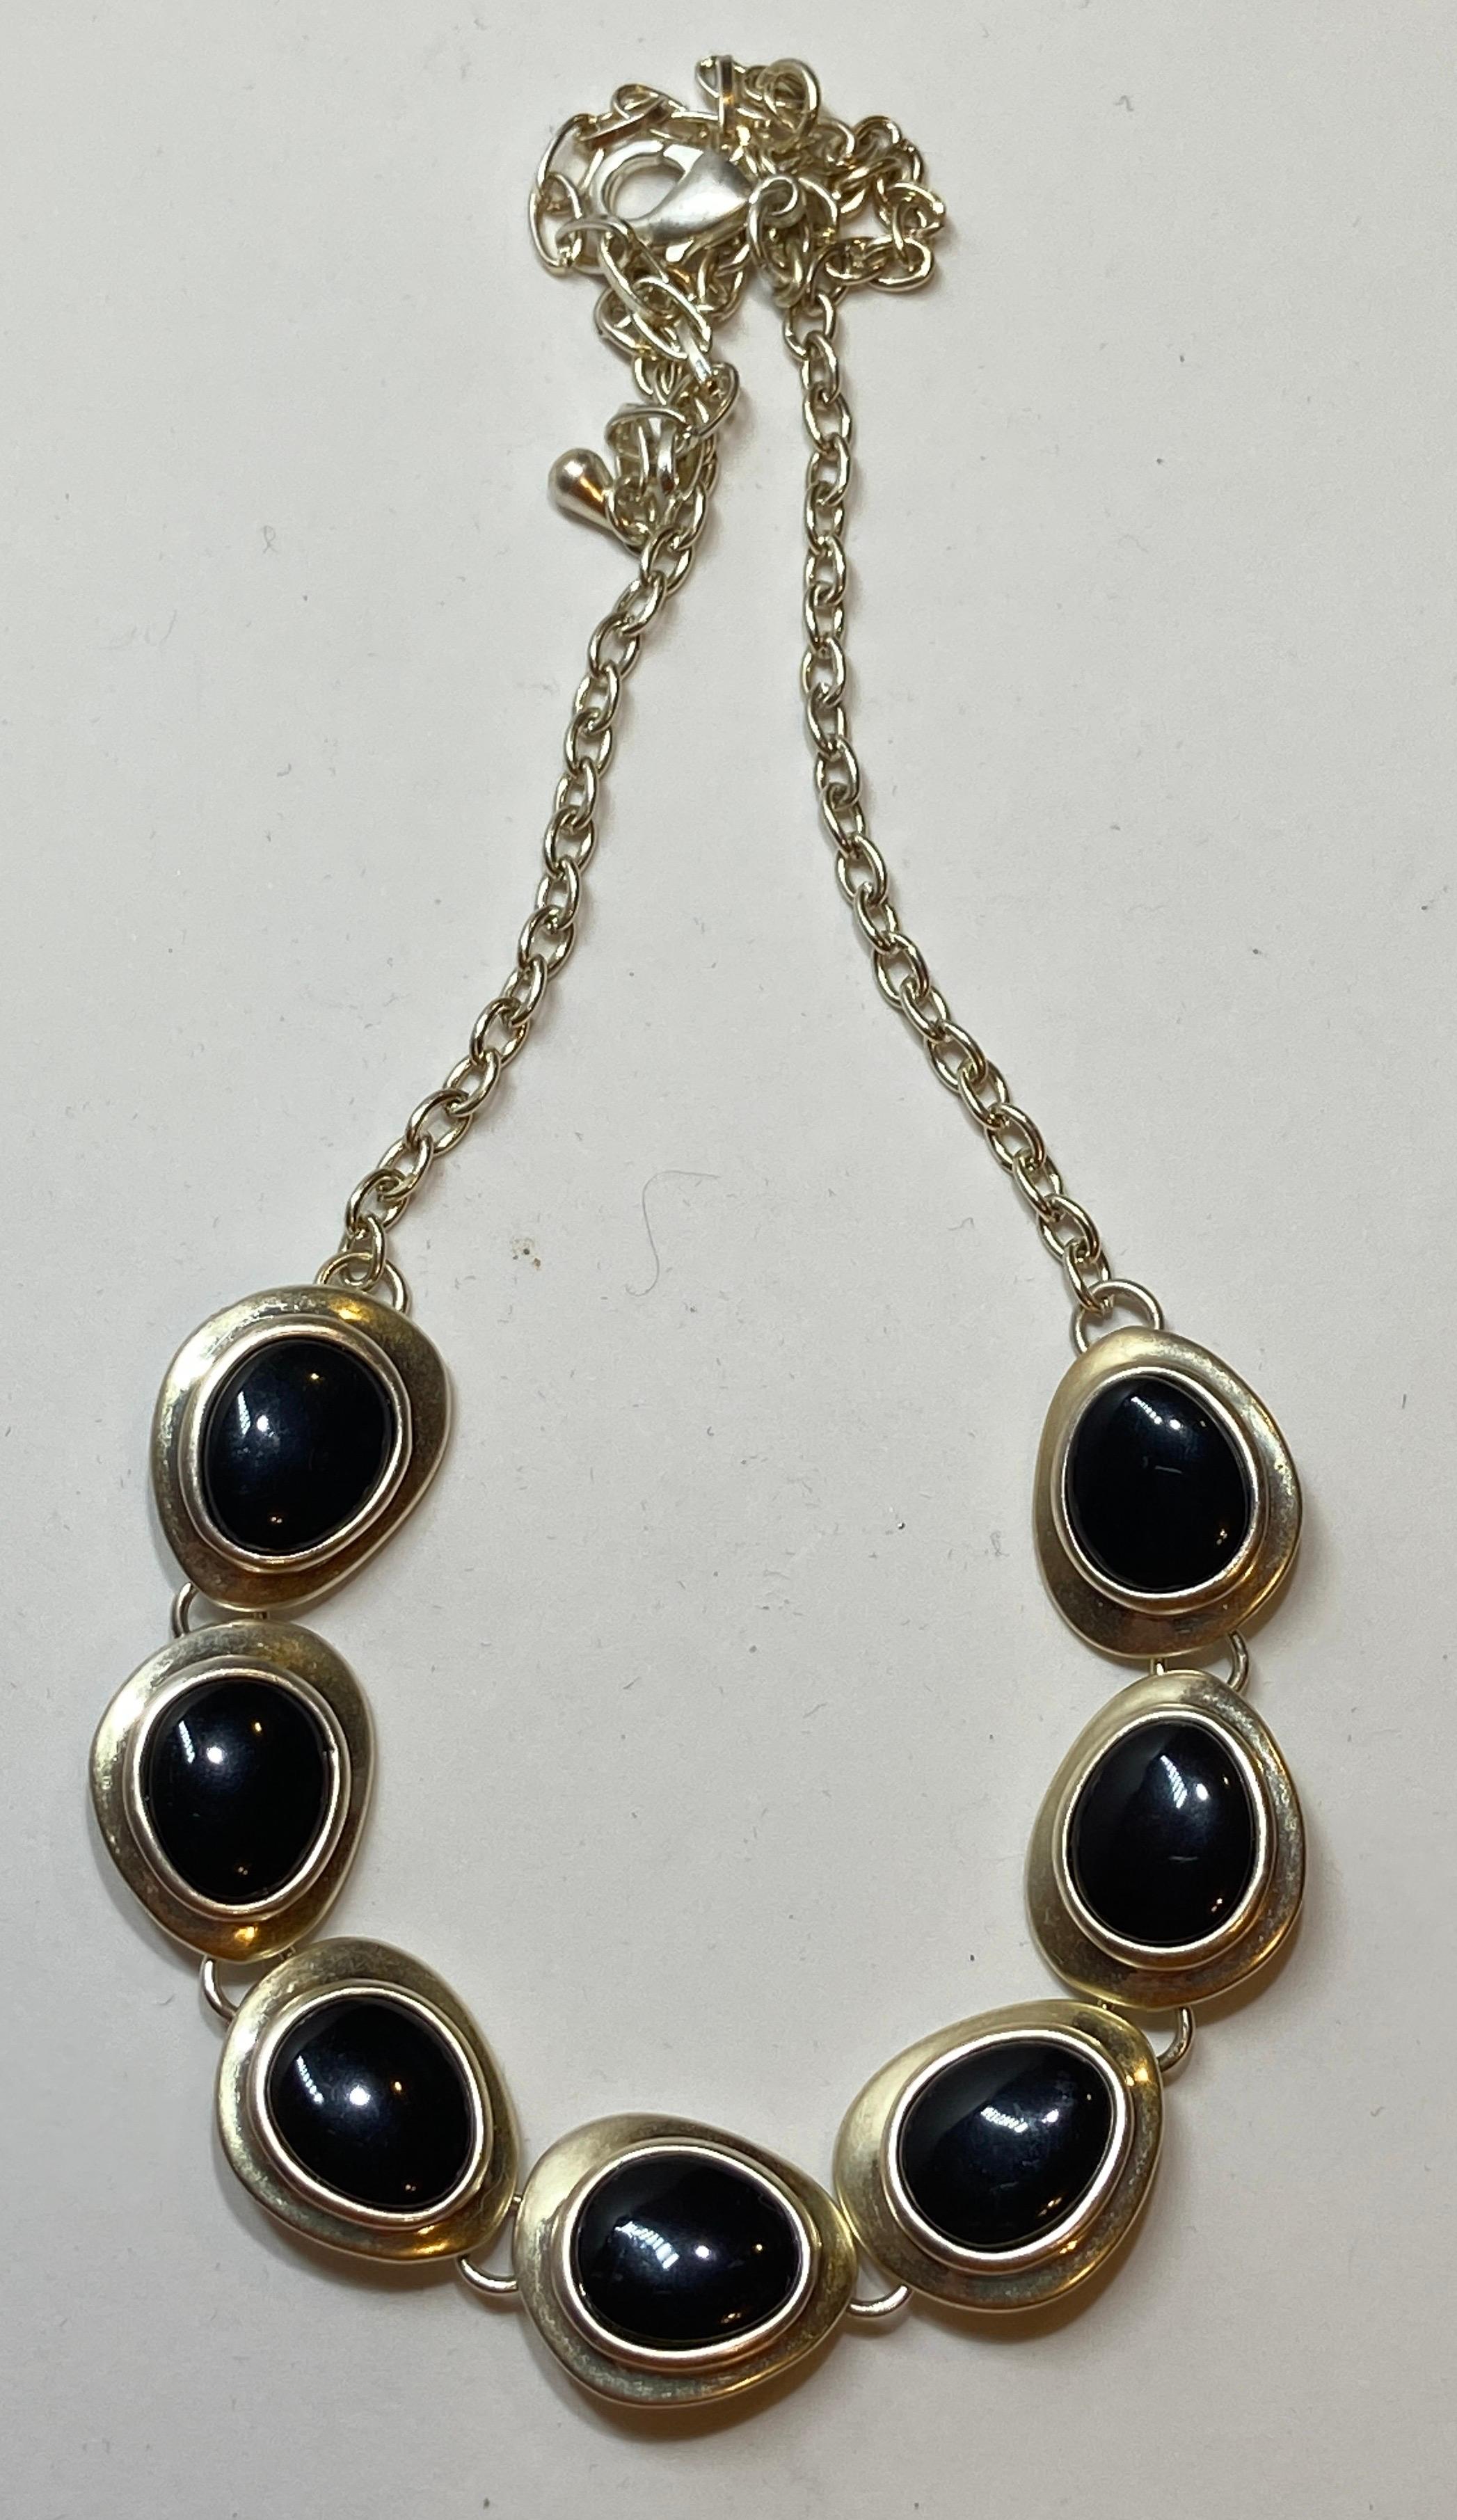 This wonderfully simple yet elegant black onyx surrounded with sterling silver is shaped like gentle soft-like pebbles. The chain-link necklace is of brushed silver hardware. Made in US.